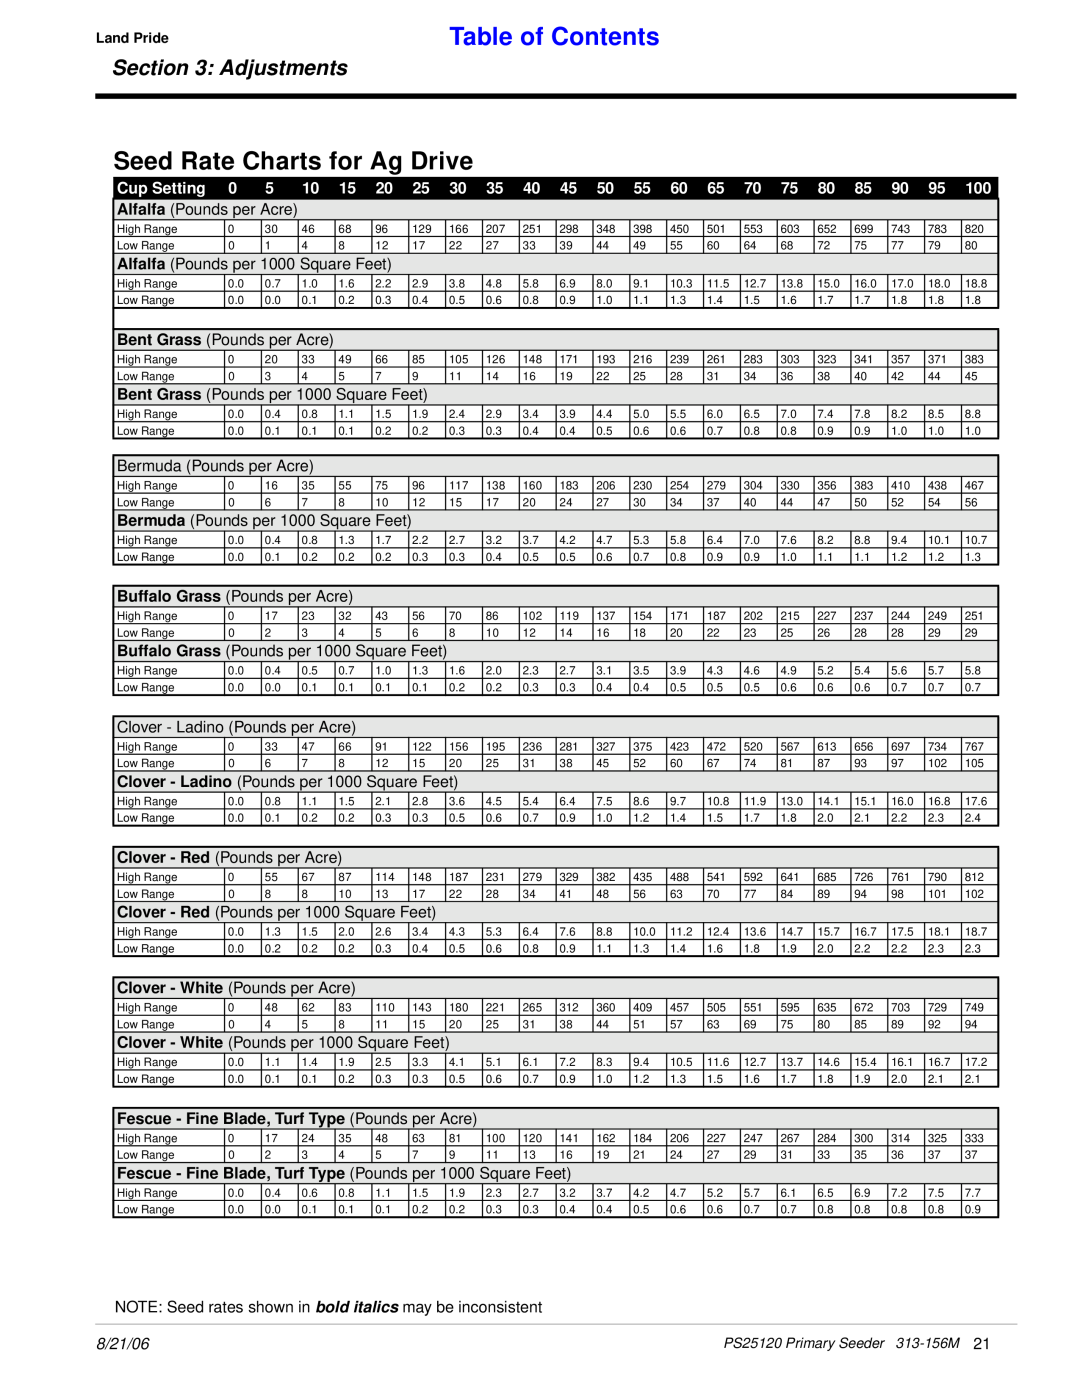 Land Pride PS25120 manual Seed Rate Charts for Ag Drive, Table of Contents, Adjustments 